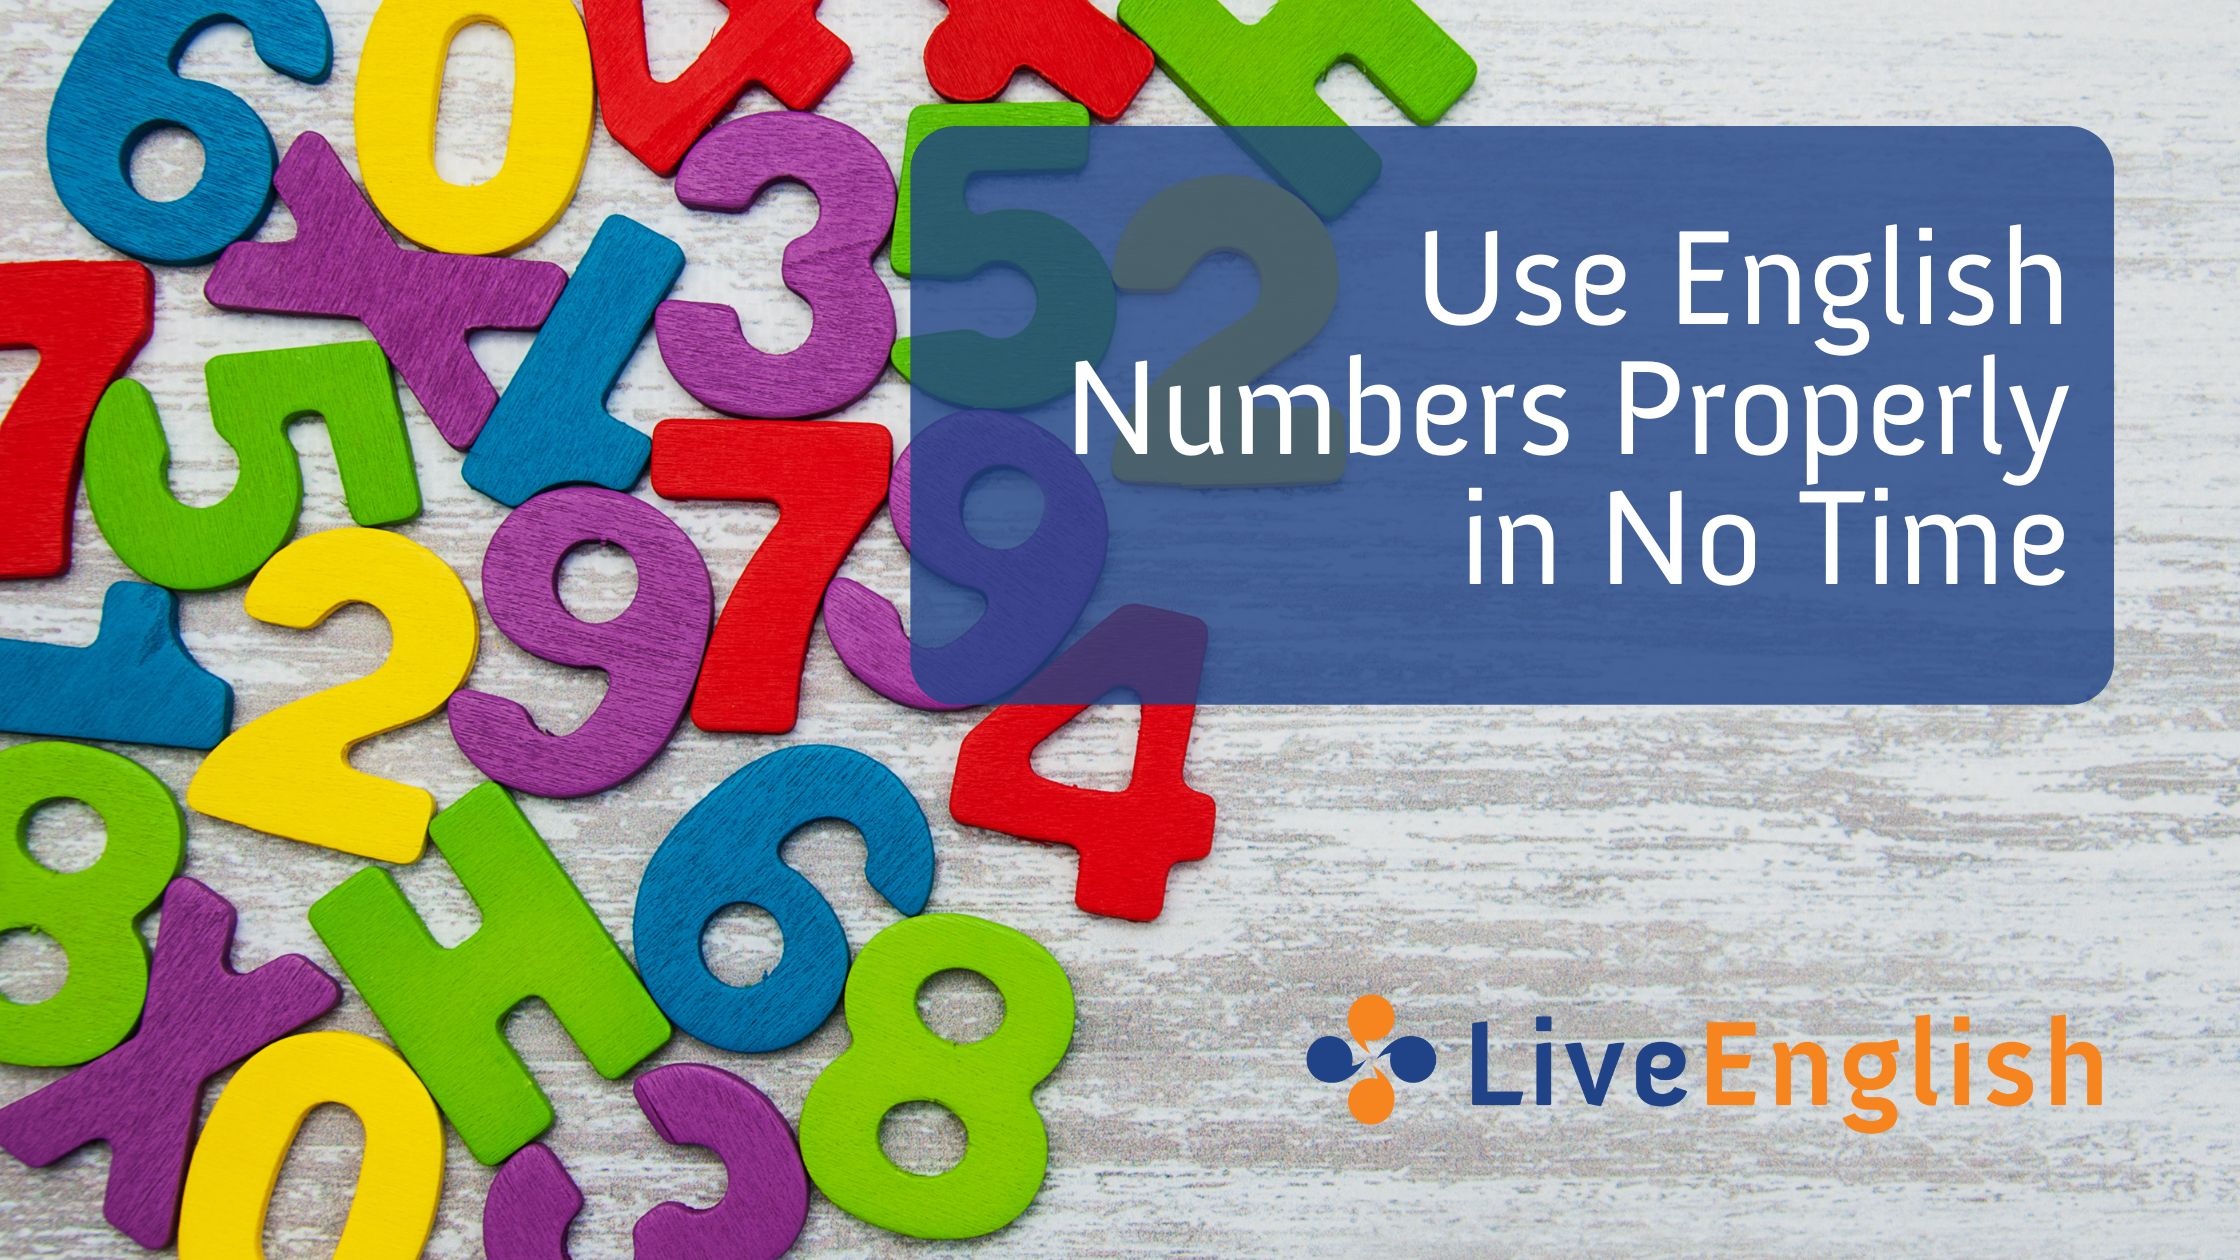 a-simple-guide-to-use-english-numbers-properly-in-no-time-live